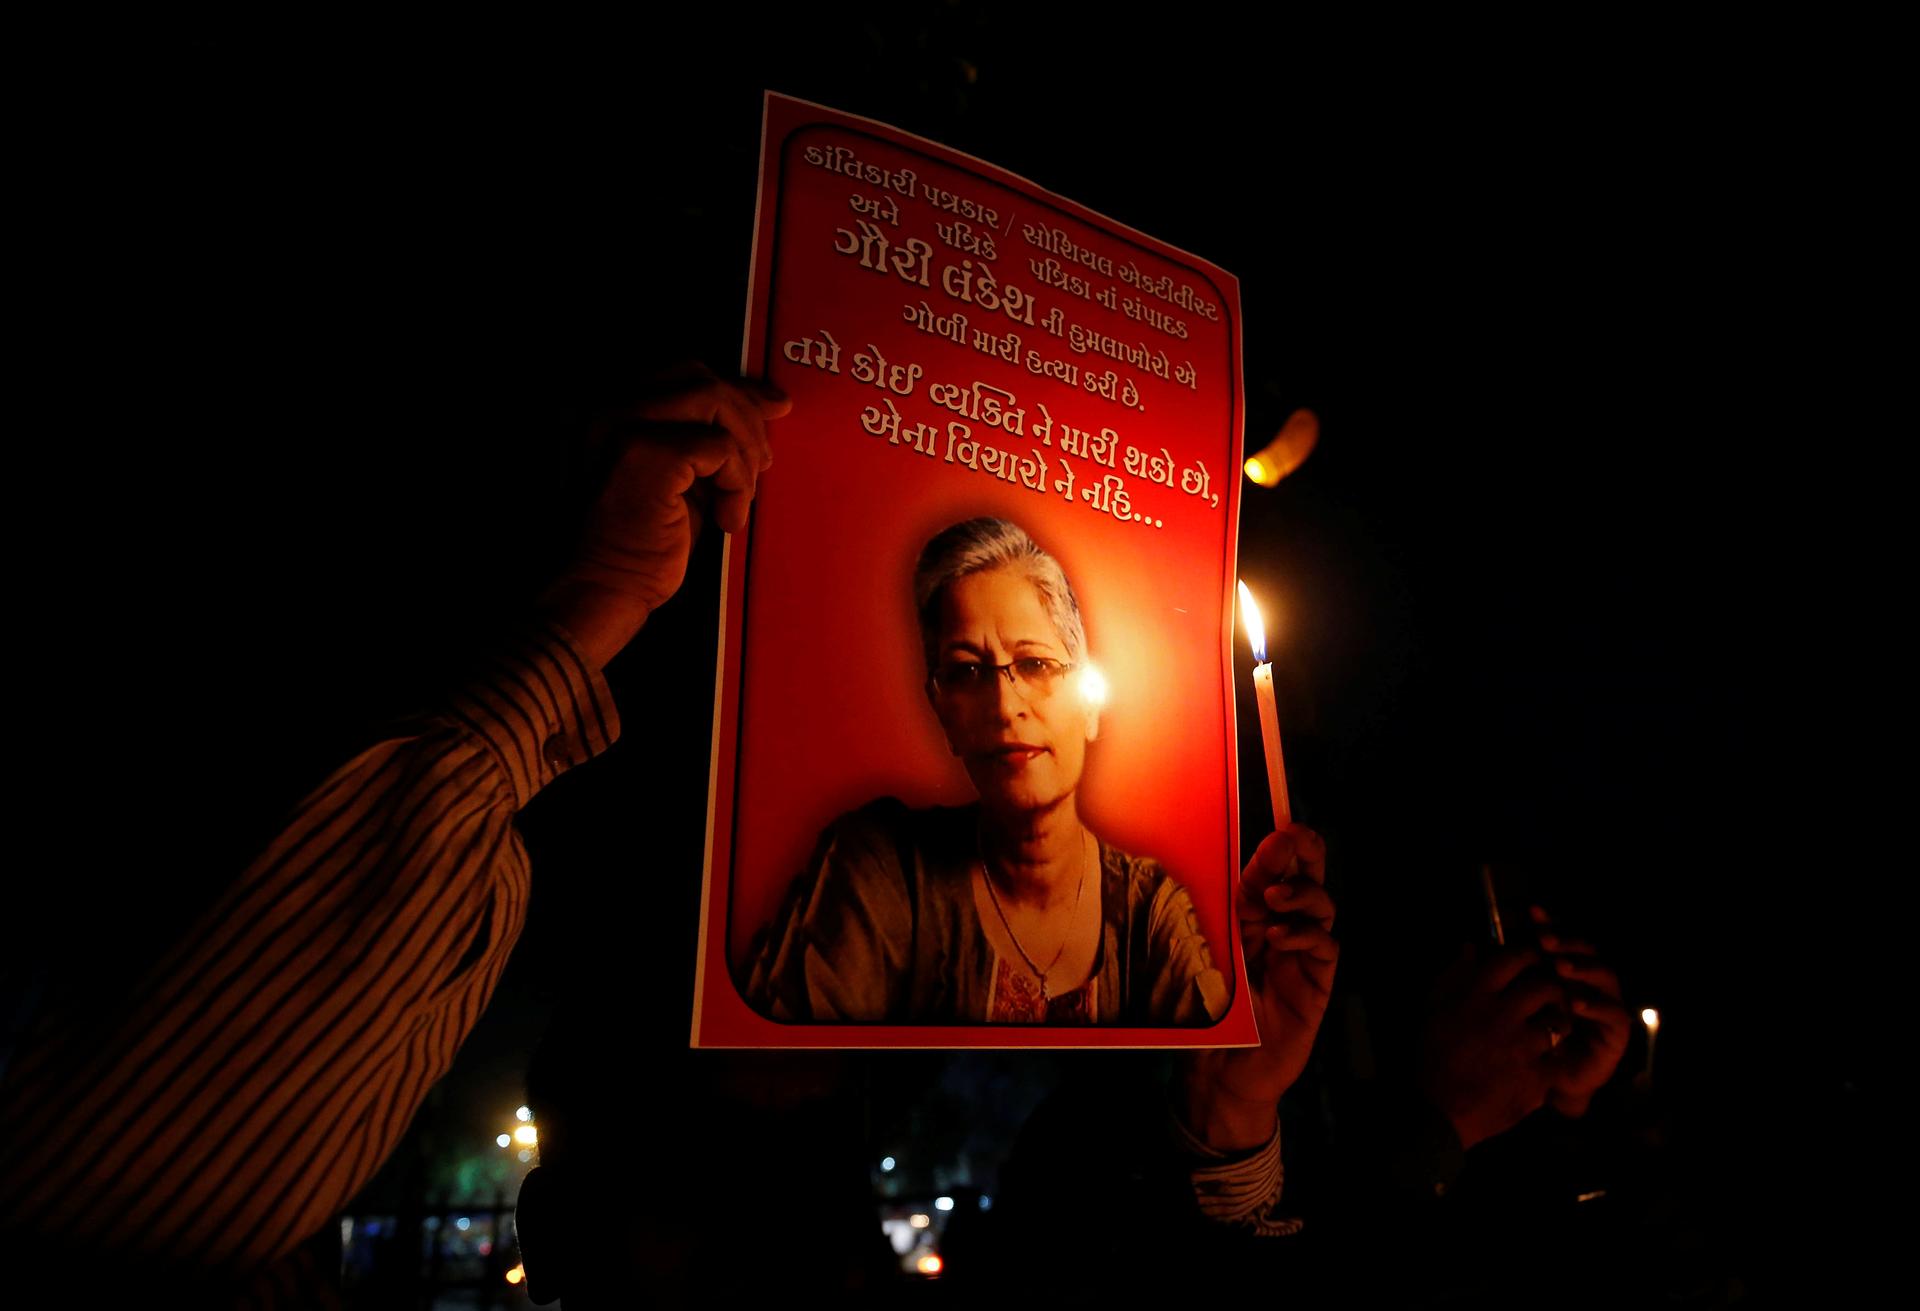 Protests and memorials in Lankesh's memory have been held across India